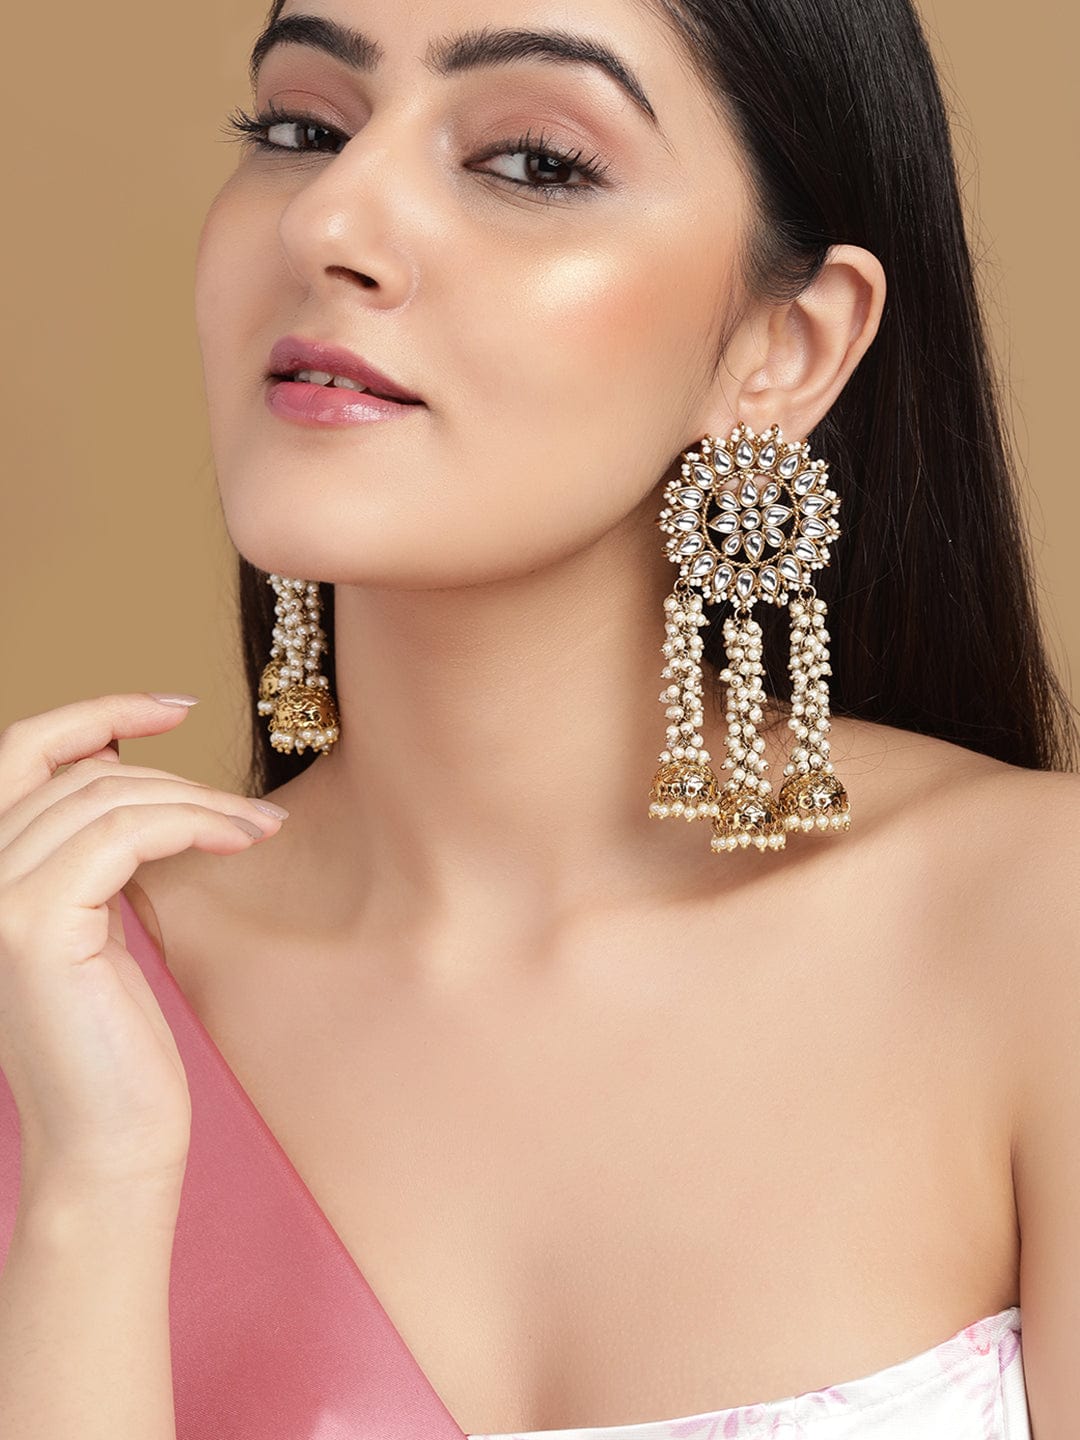 Which is the best earring style to wear on a lehenga? - Quora